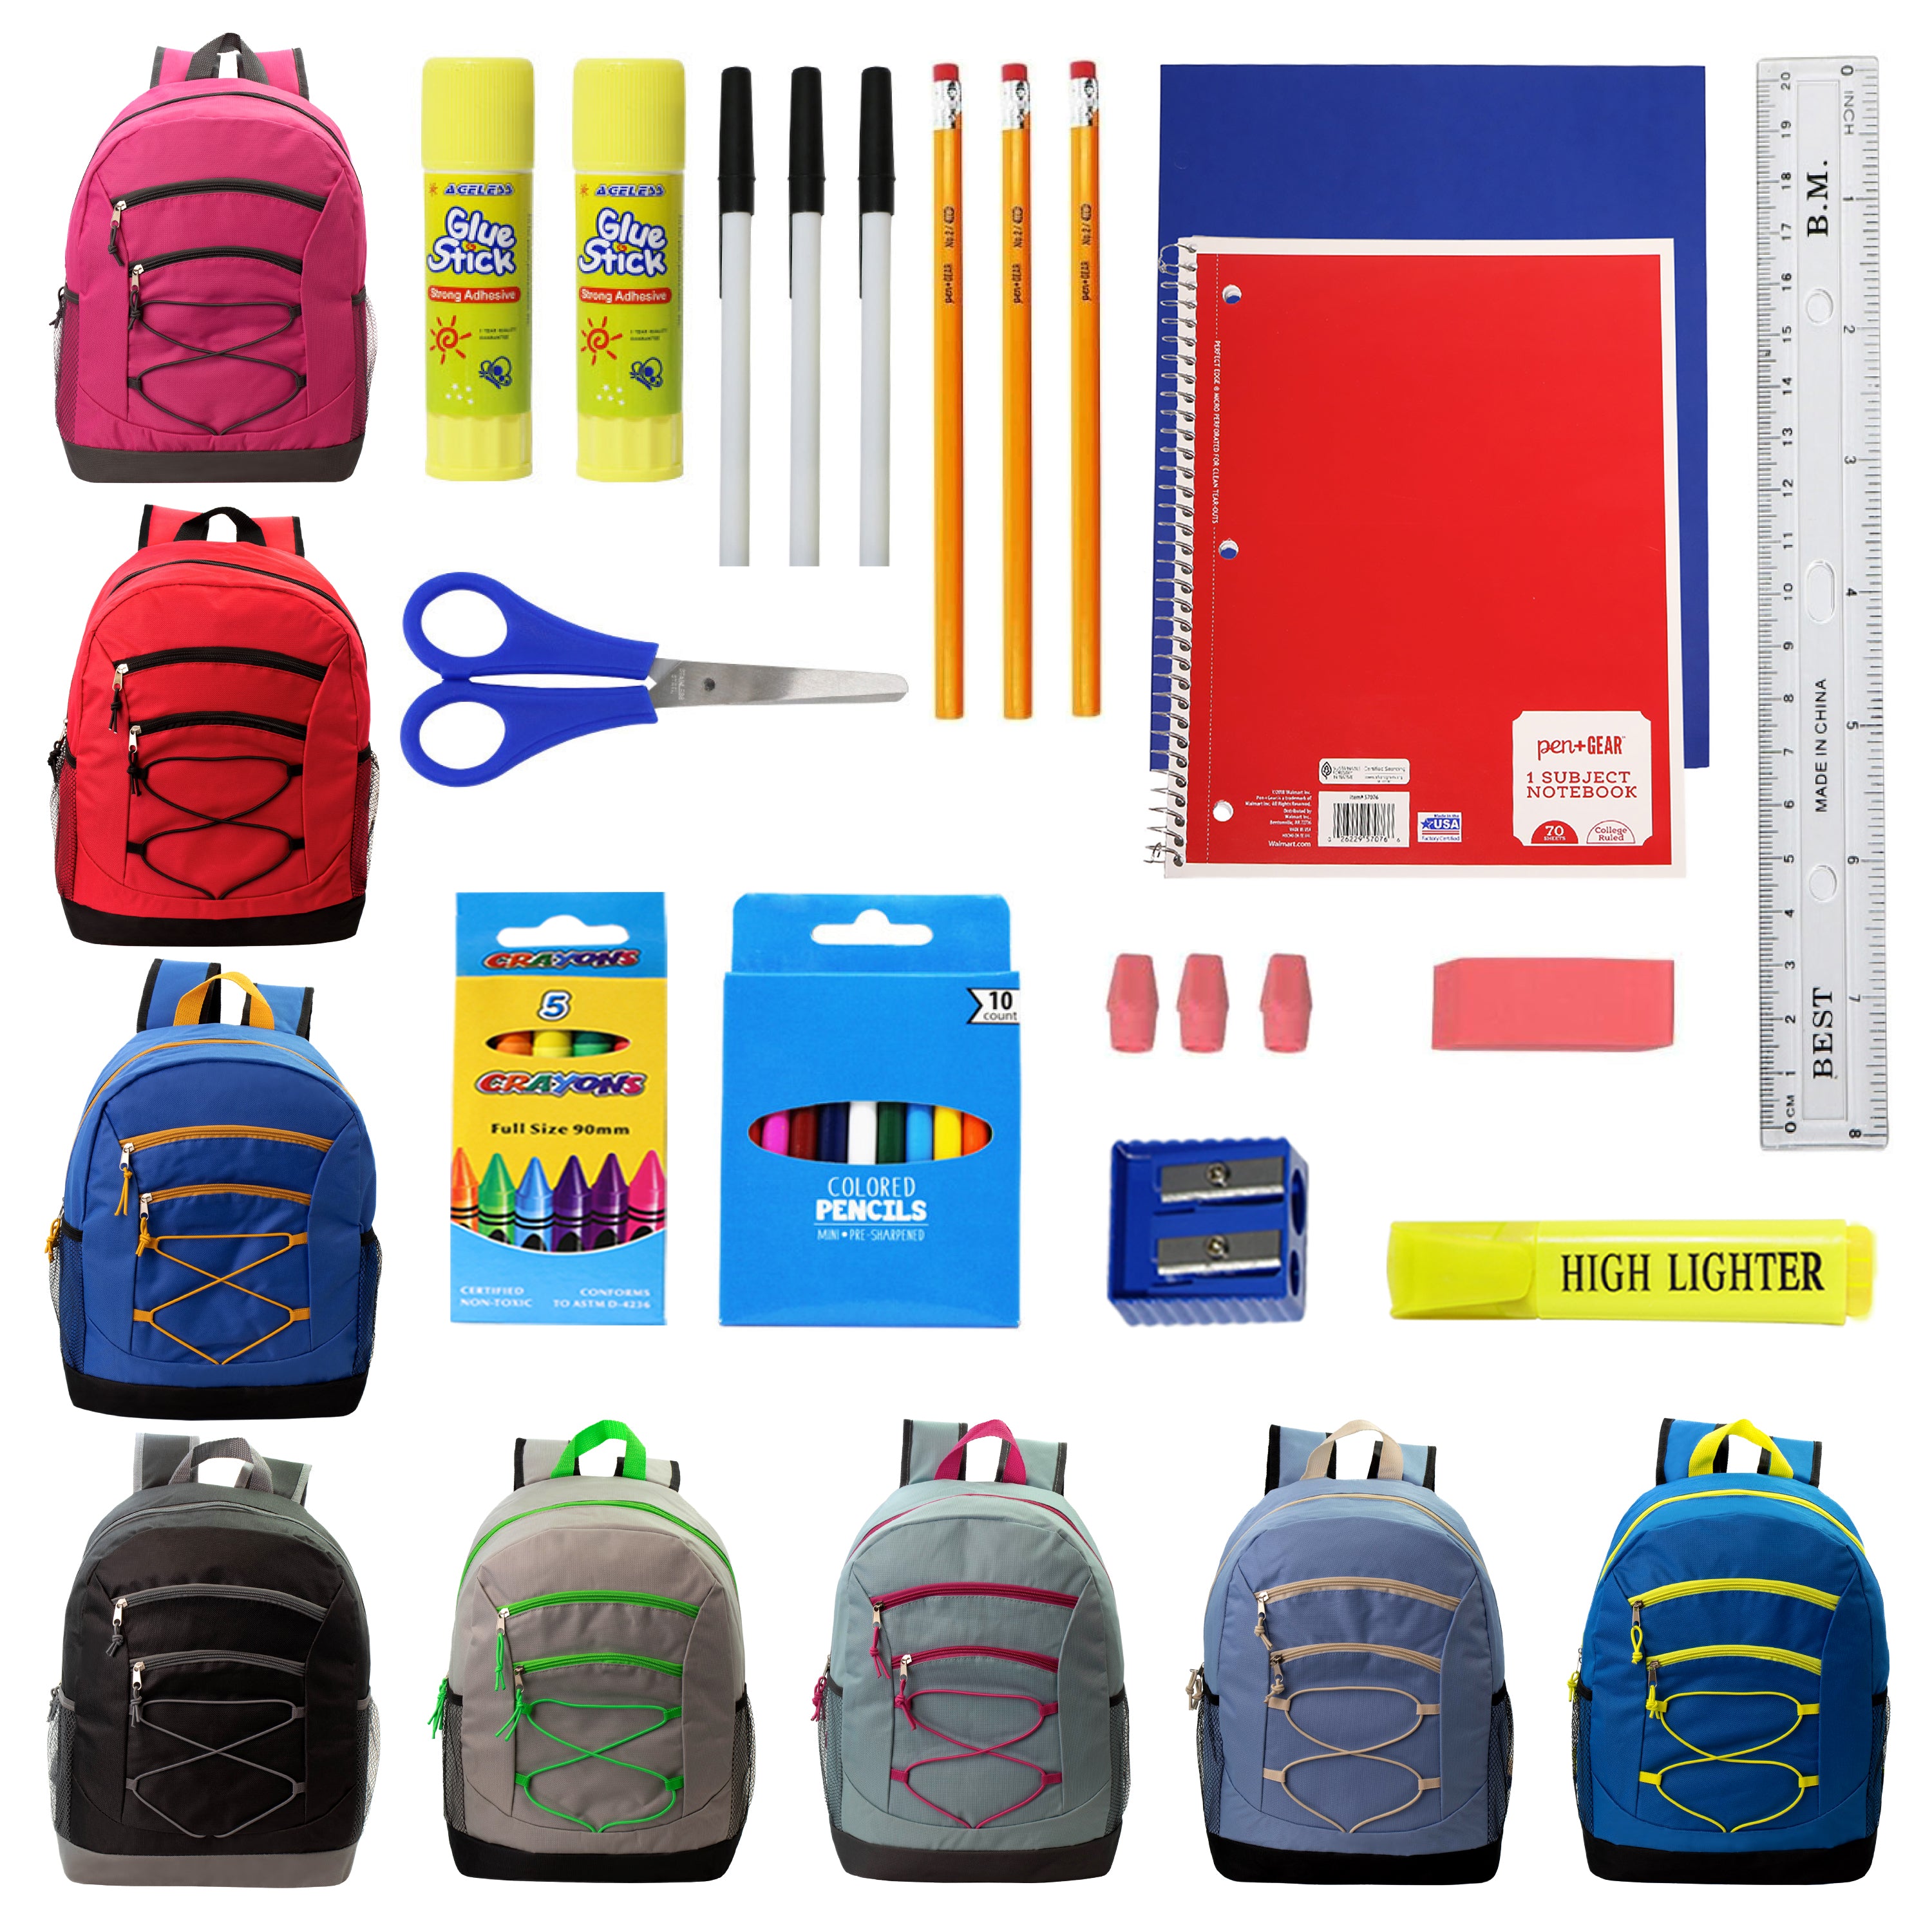 17 Inch Bulk Backpacks in Assorted Designs with School Supply Kits Wholesale - Kit of 12